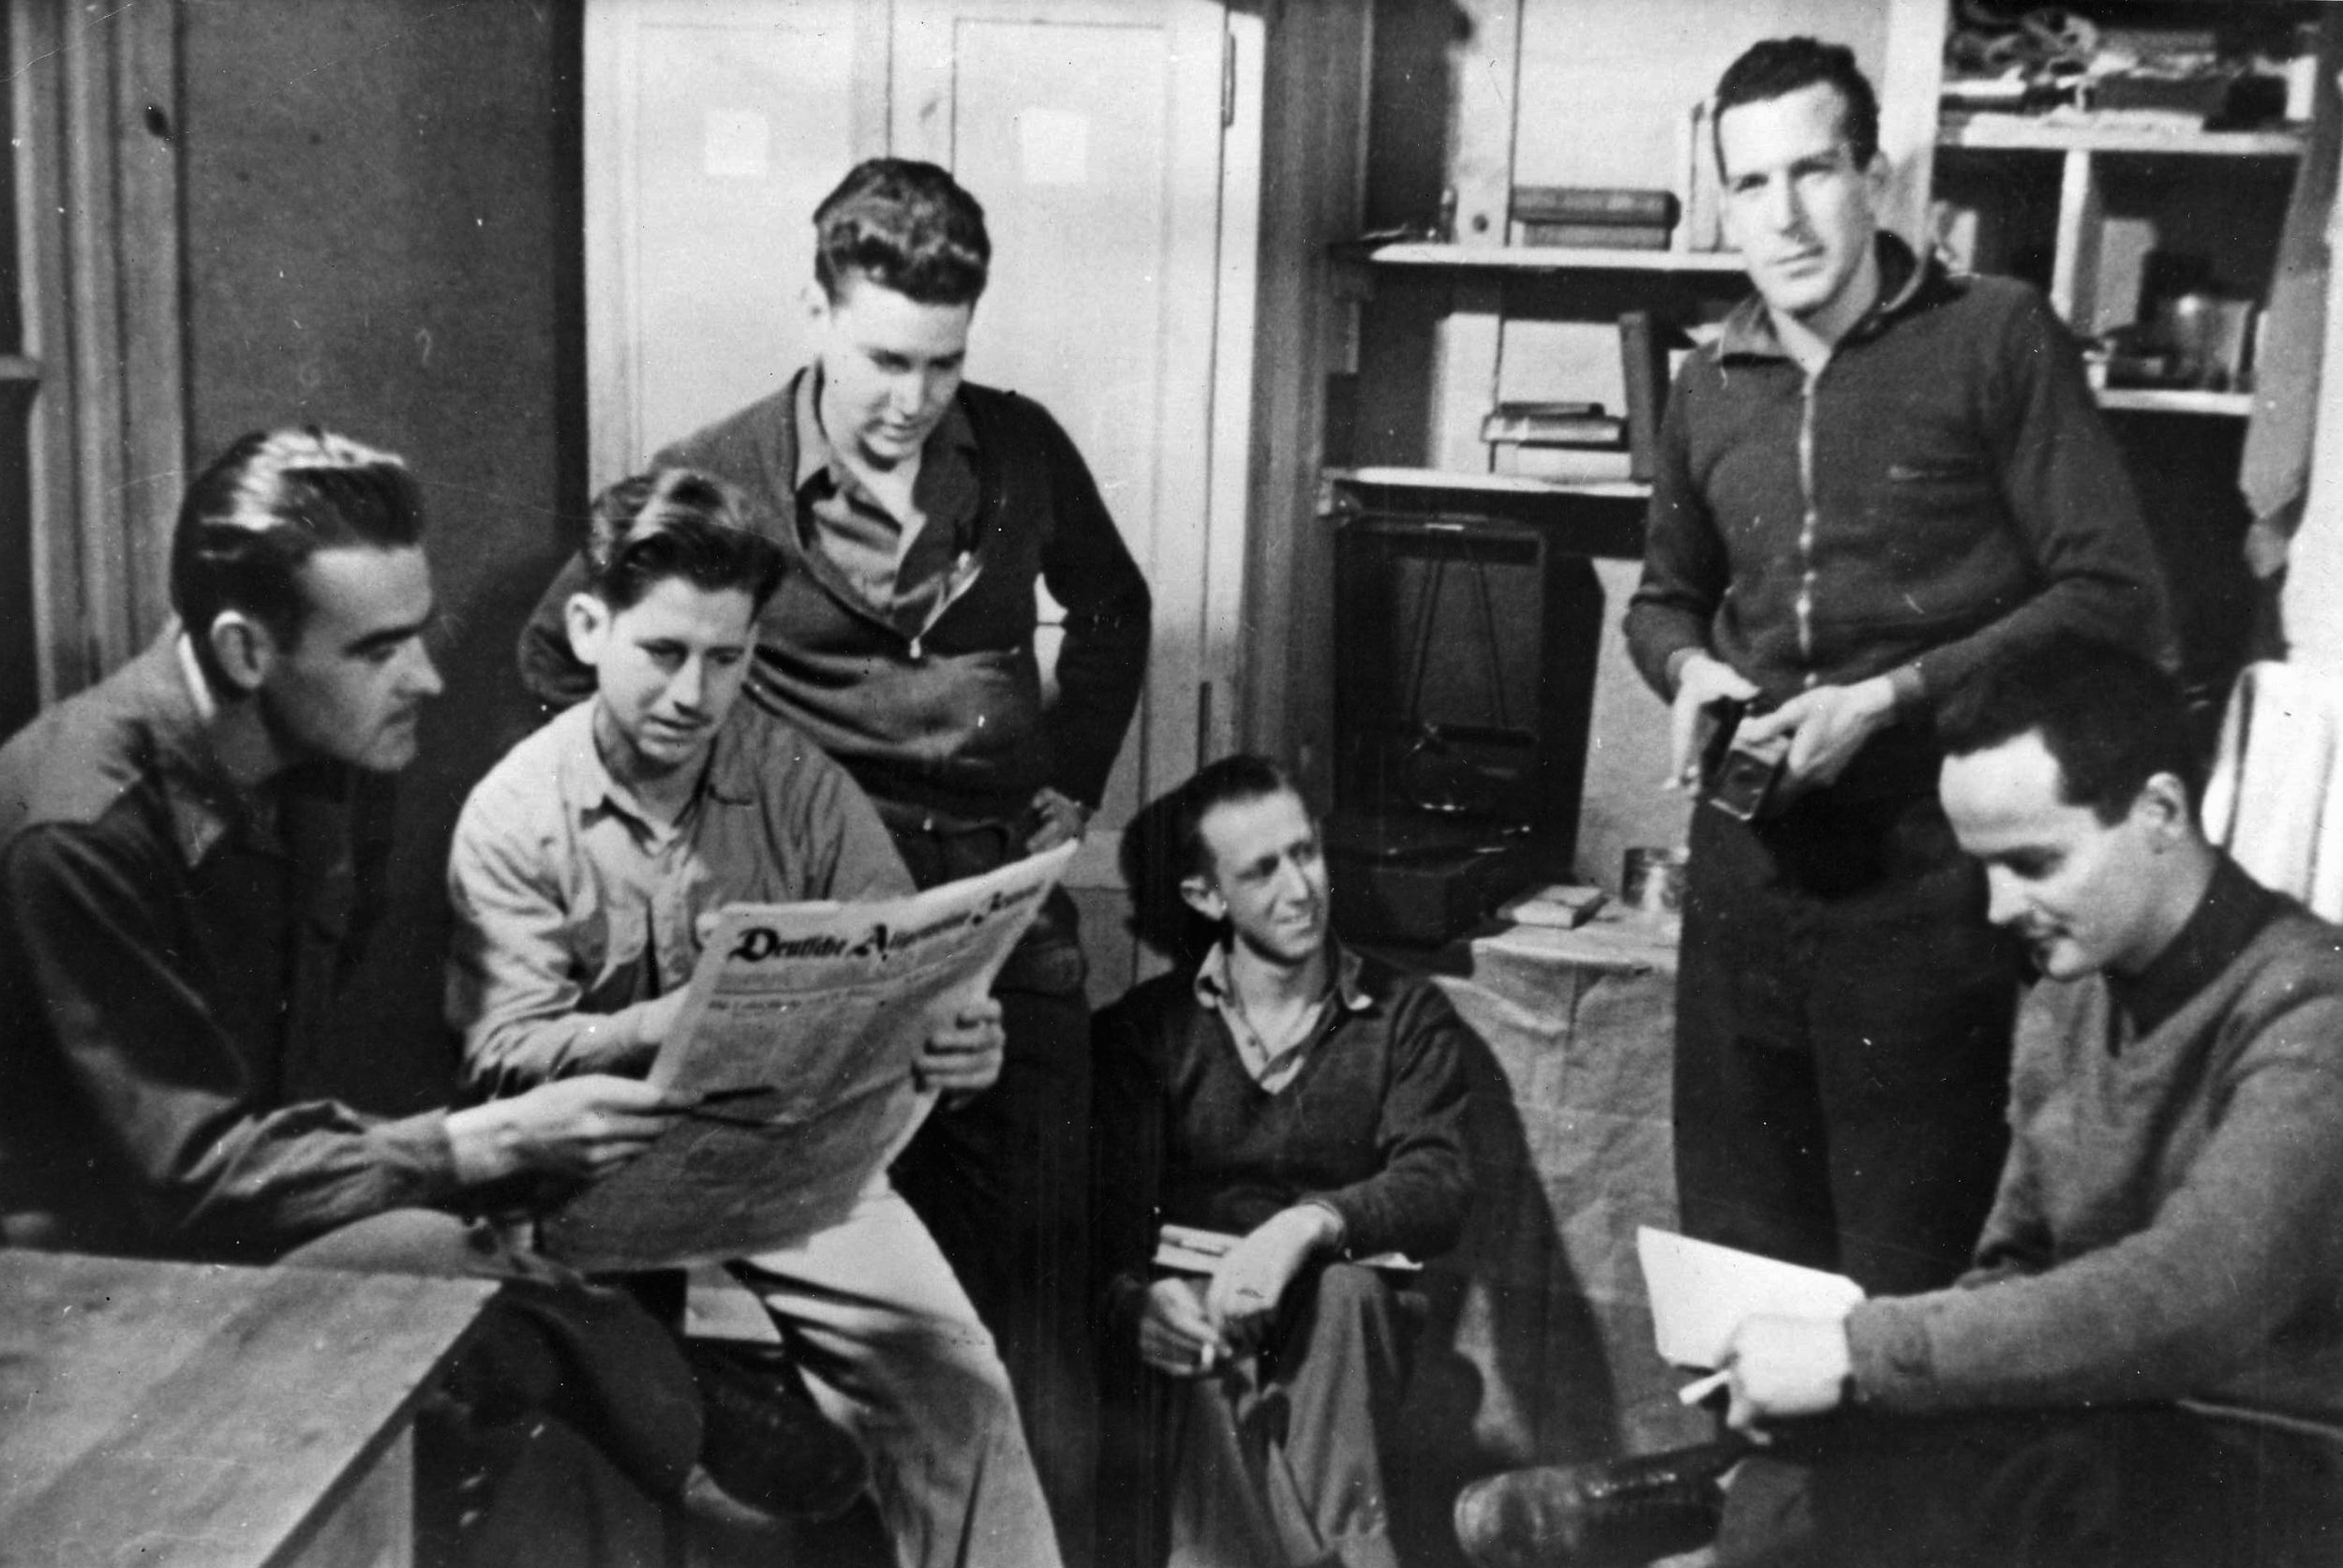 In this staged photograph, captured American airmen peruse a German newspaper in Stalag Luft III. In reality, the conditions in German POW camps were harsh at best. The situation deteriorated rapidly as the Allied armies advanced into Germany. (National Archives)